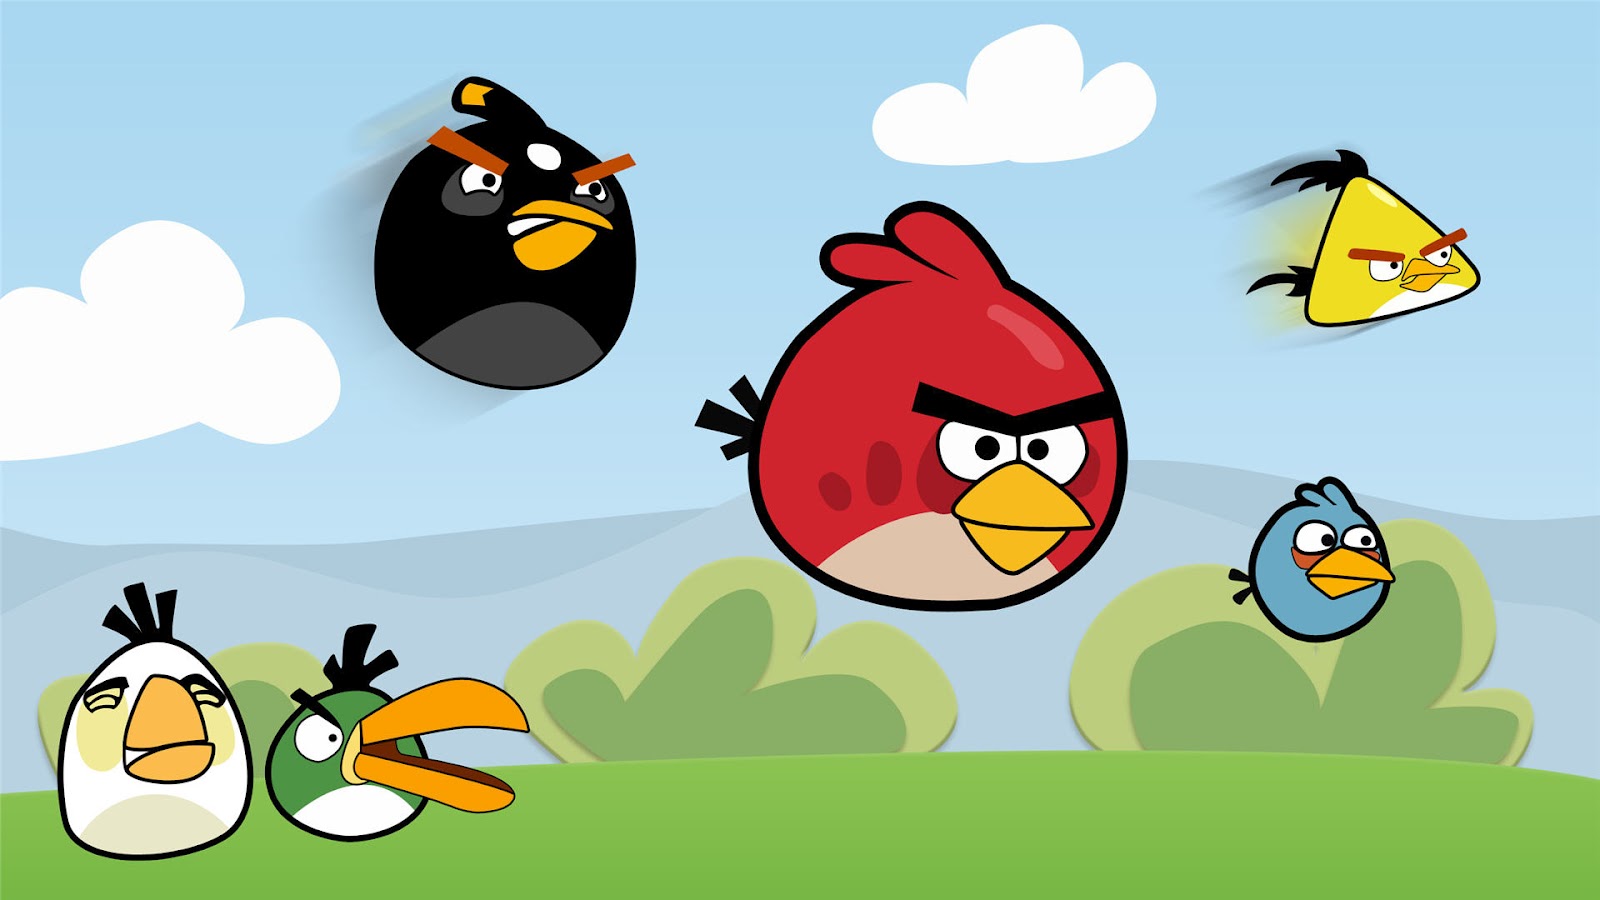  Bird Angry Bird in Action Black Angry Bird Angry Bird Wallpapers